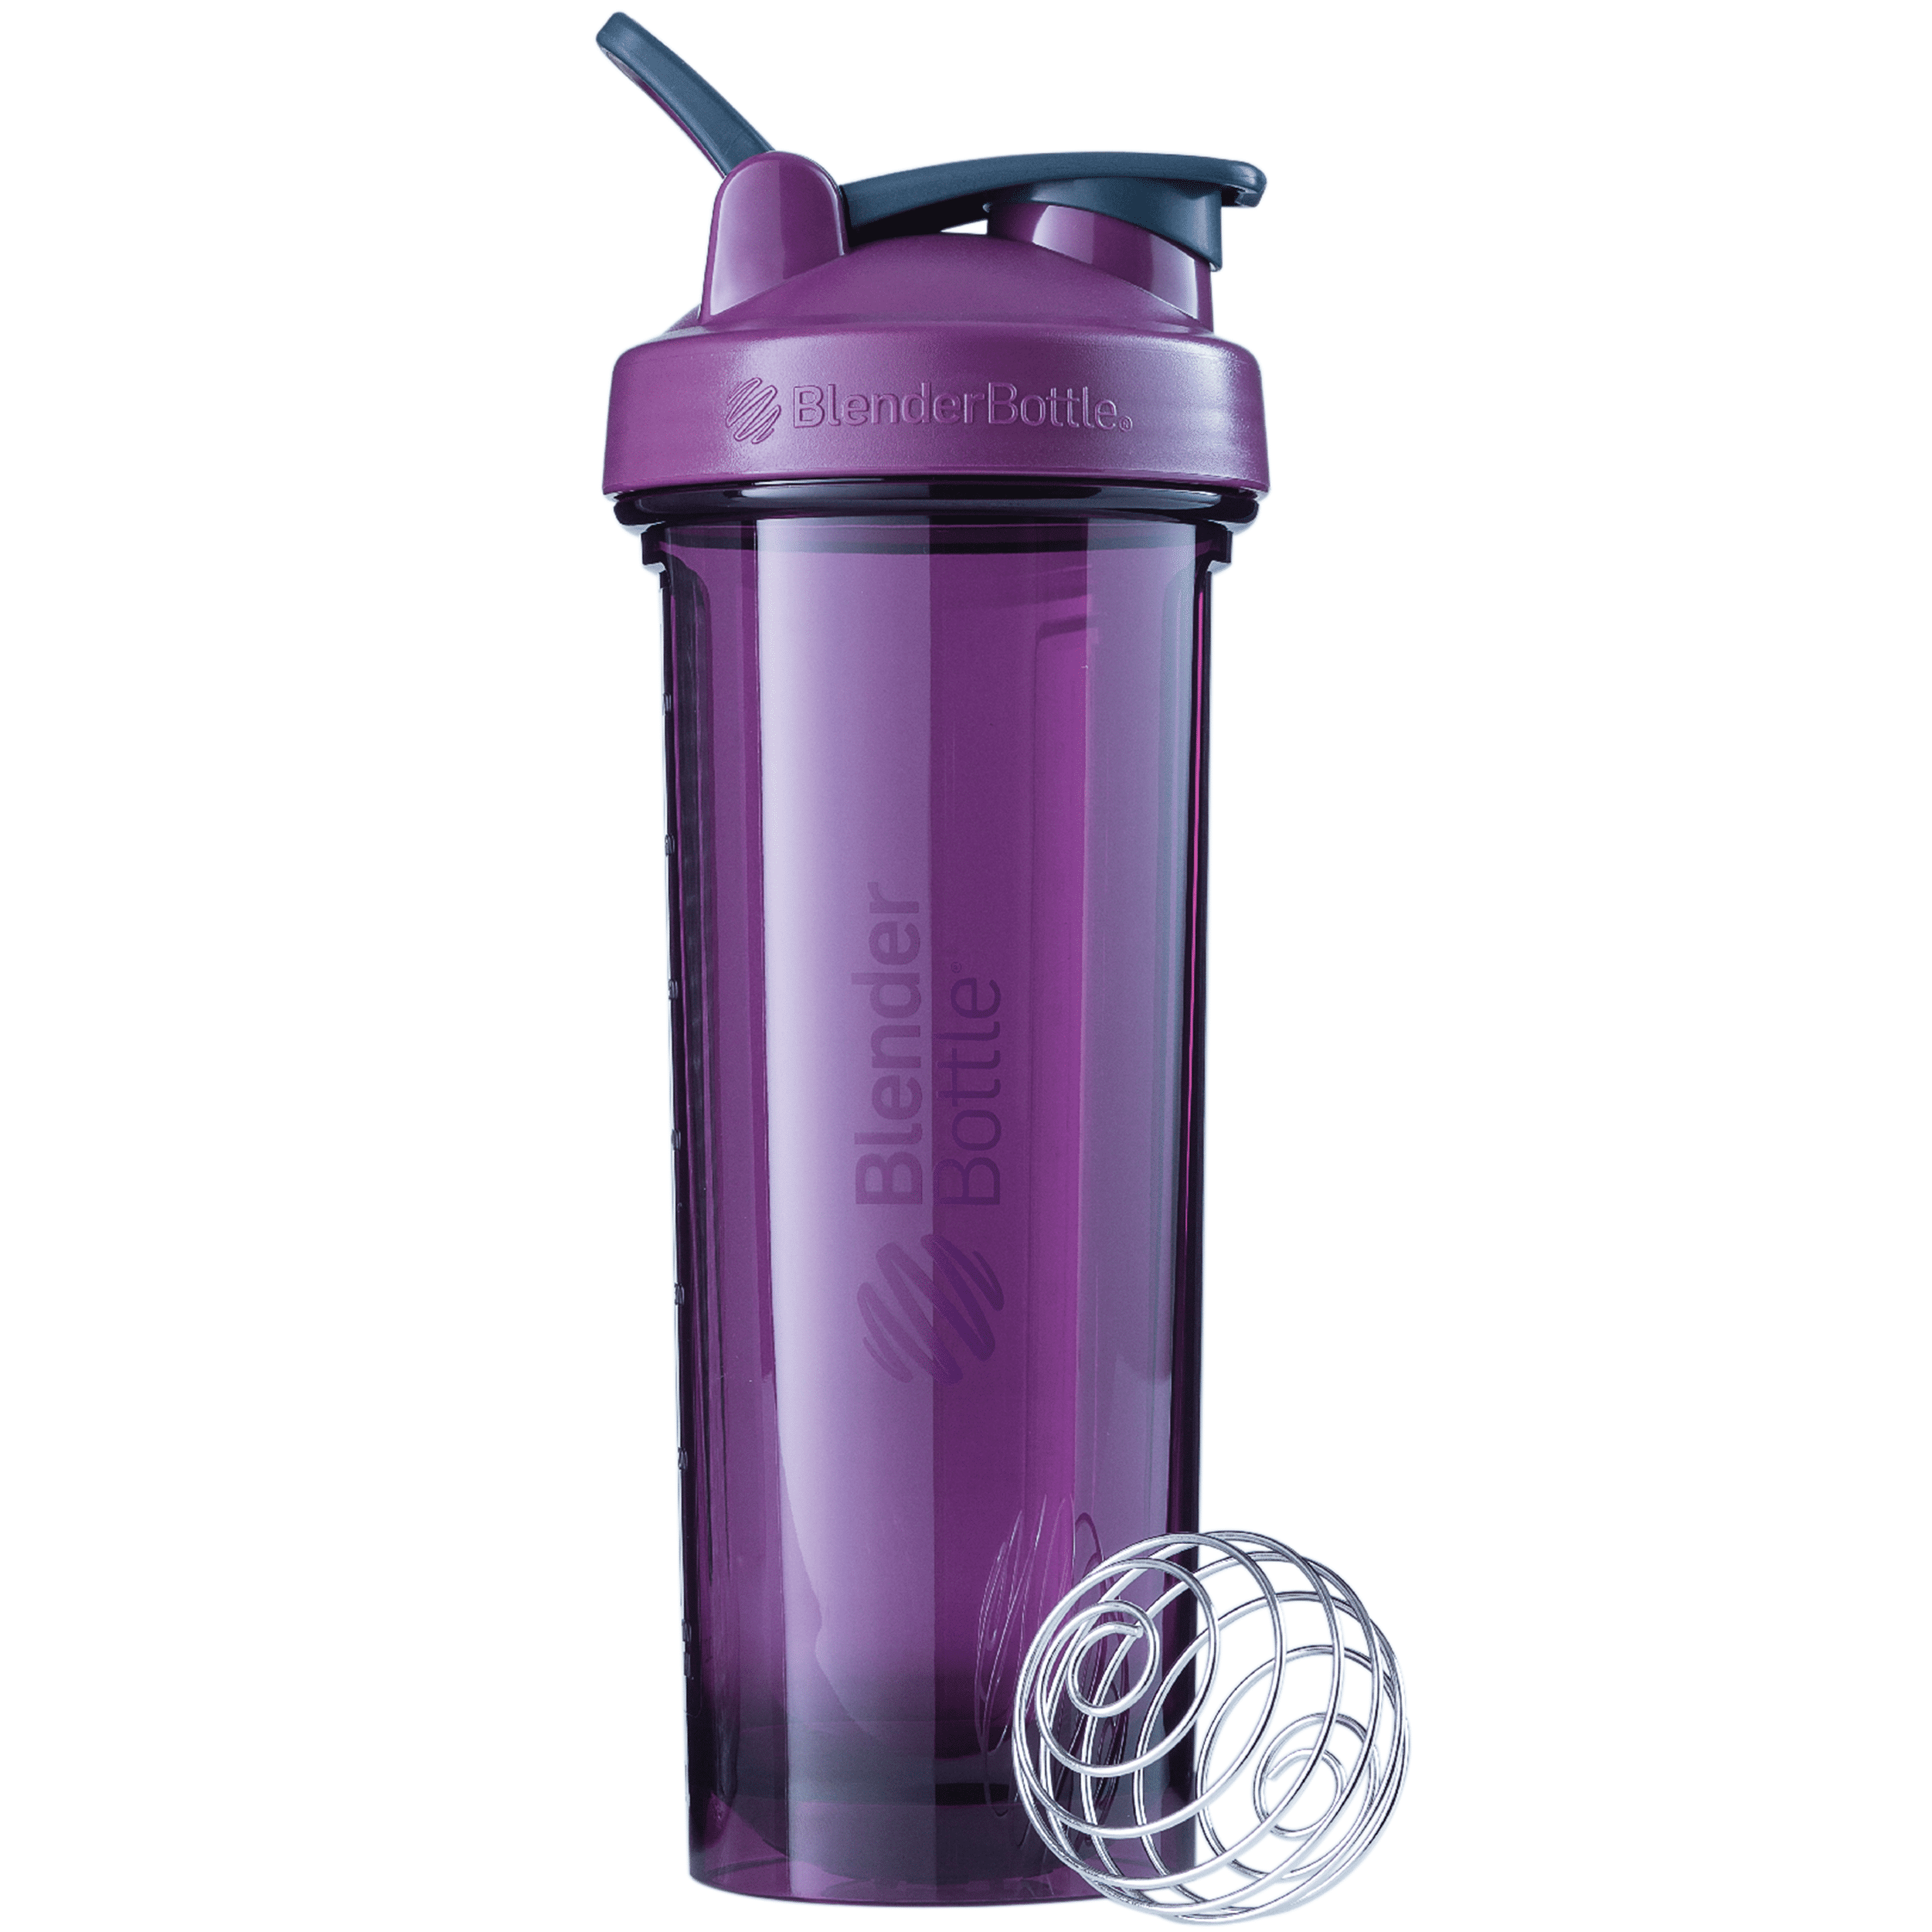  Shaker Bottle A Small Pure Plum Purple 12Oz/400ml w.  Measurement Marks & Stainless Whisk Blender Mixer Ball,BPA Free,Made of  PP5,-4~248 °F,Perfect for Nutrition/Protein/Keto/Juice Powder Shaking :  Home & Kitchen